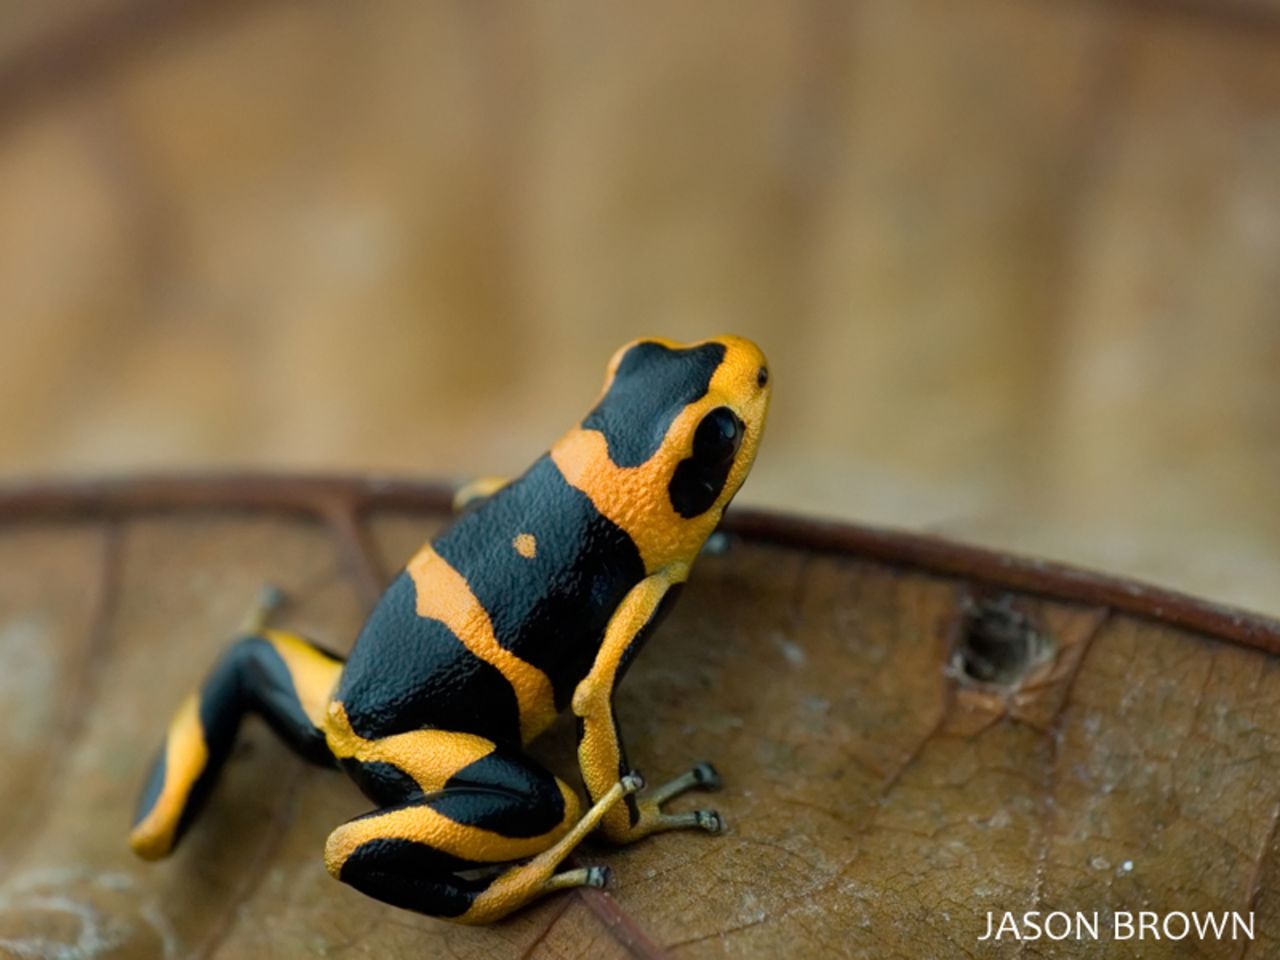 The summers' poison frog is a recently discovered amphibian which is classified as endangered. 